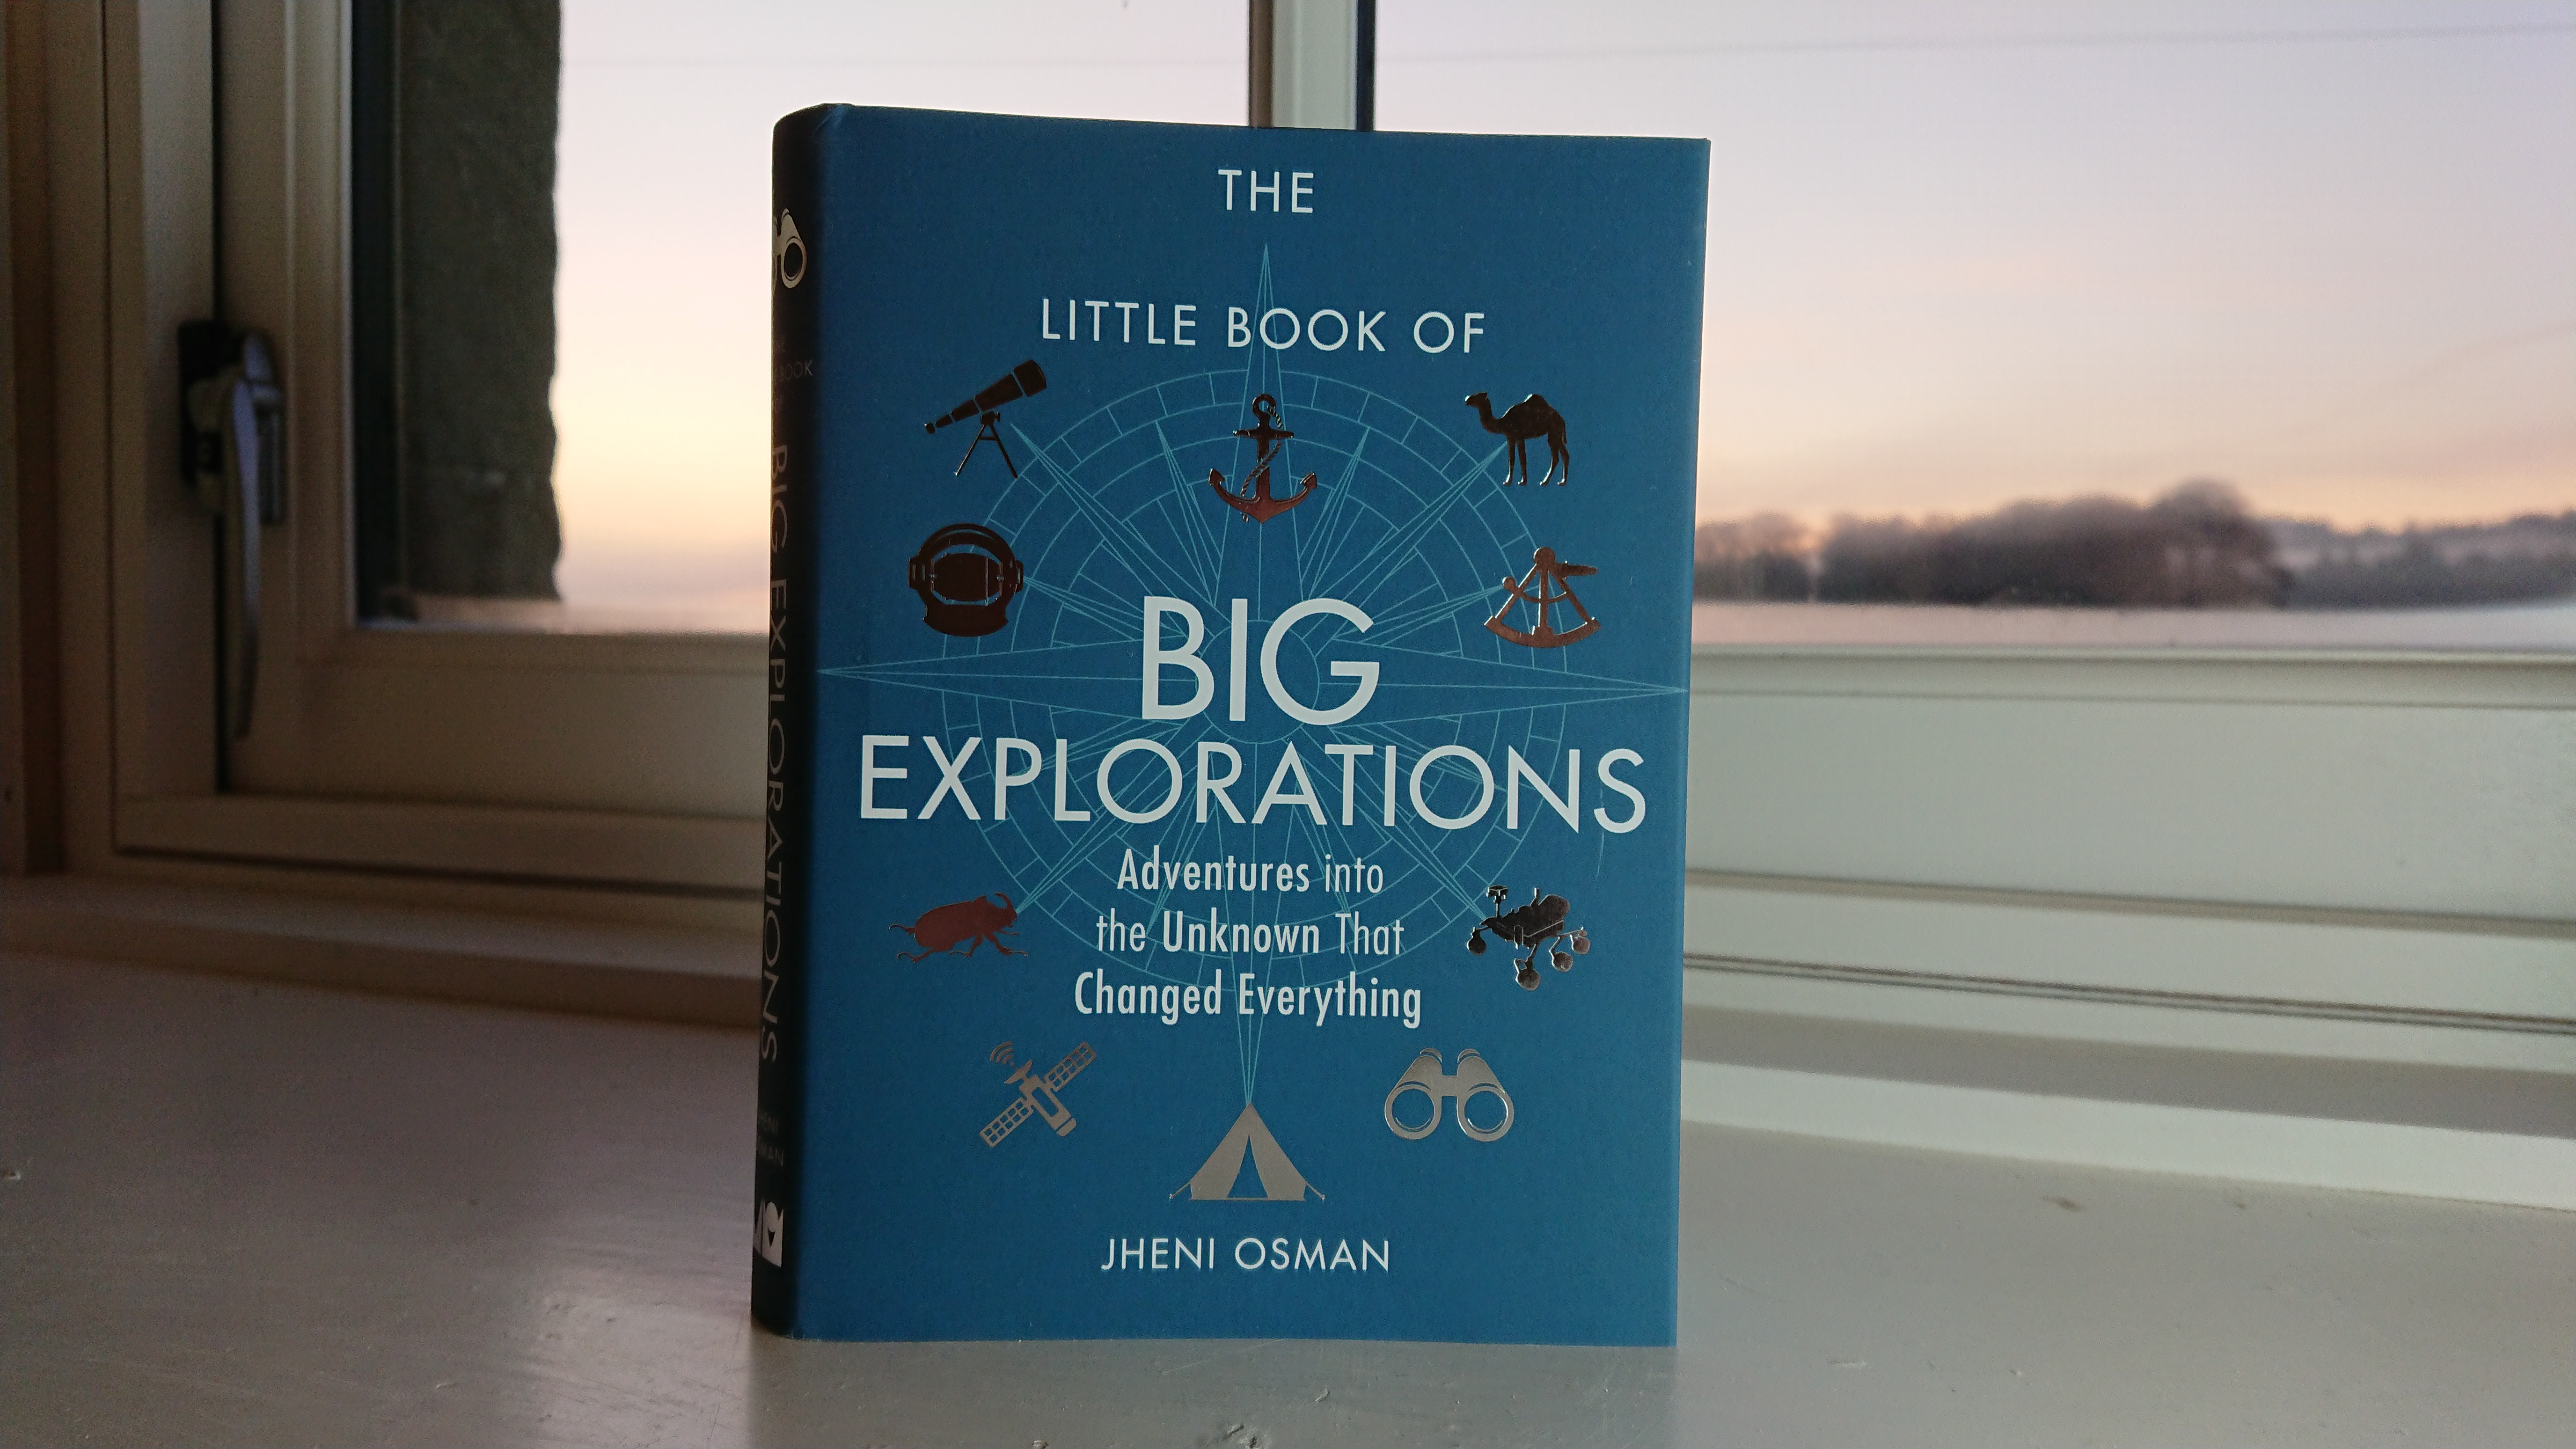 Fireside reading: The Little Book of Big Explorations by Jheni Osman